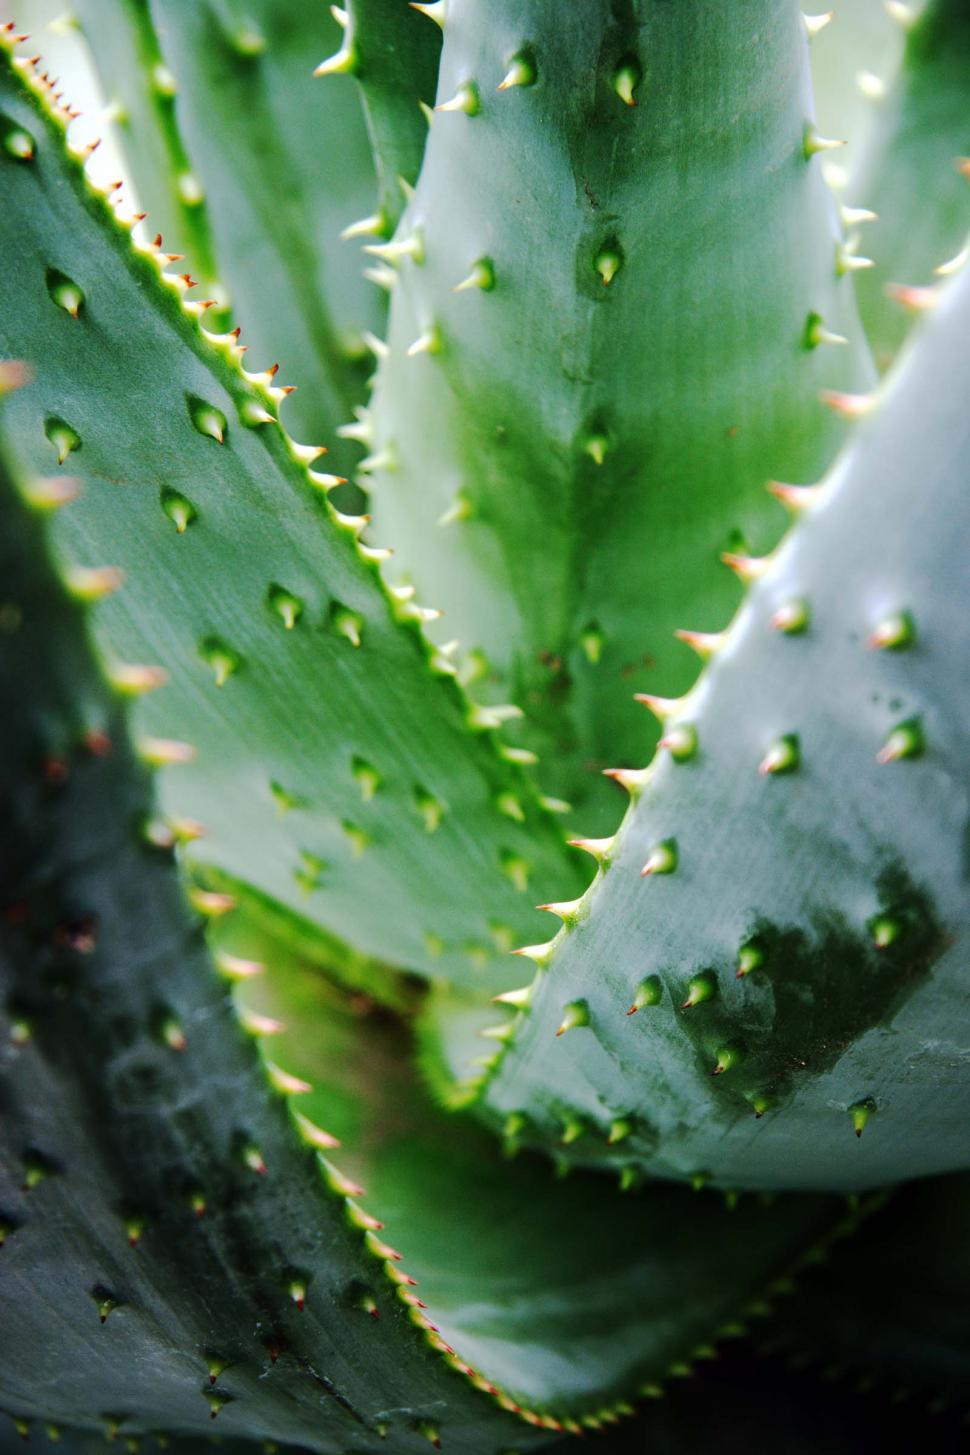 Free Image of Agave Spines 